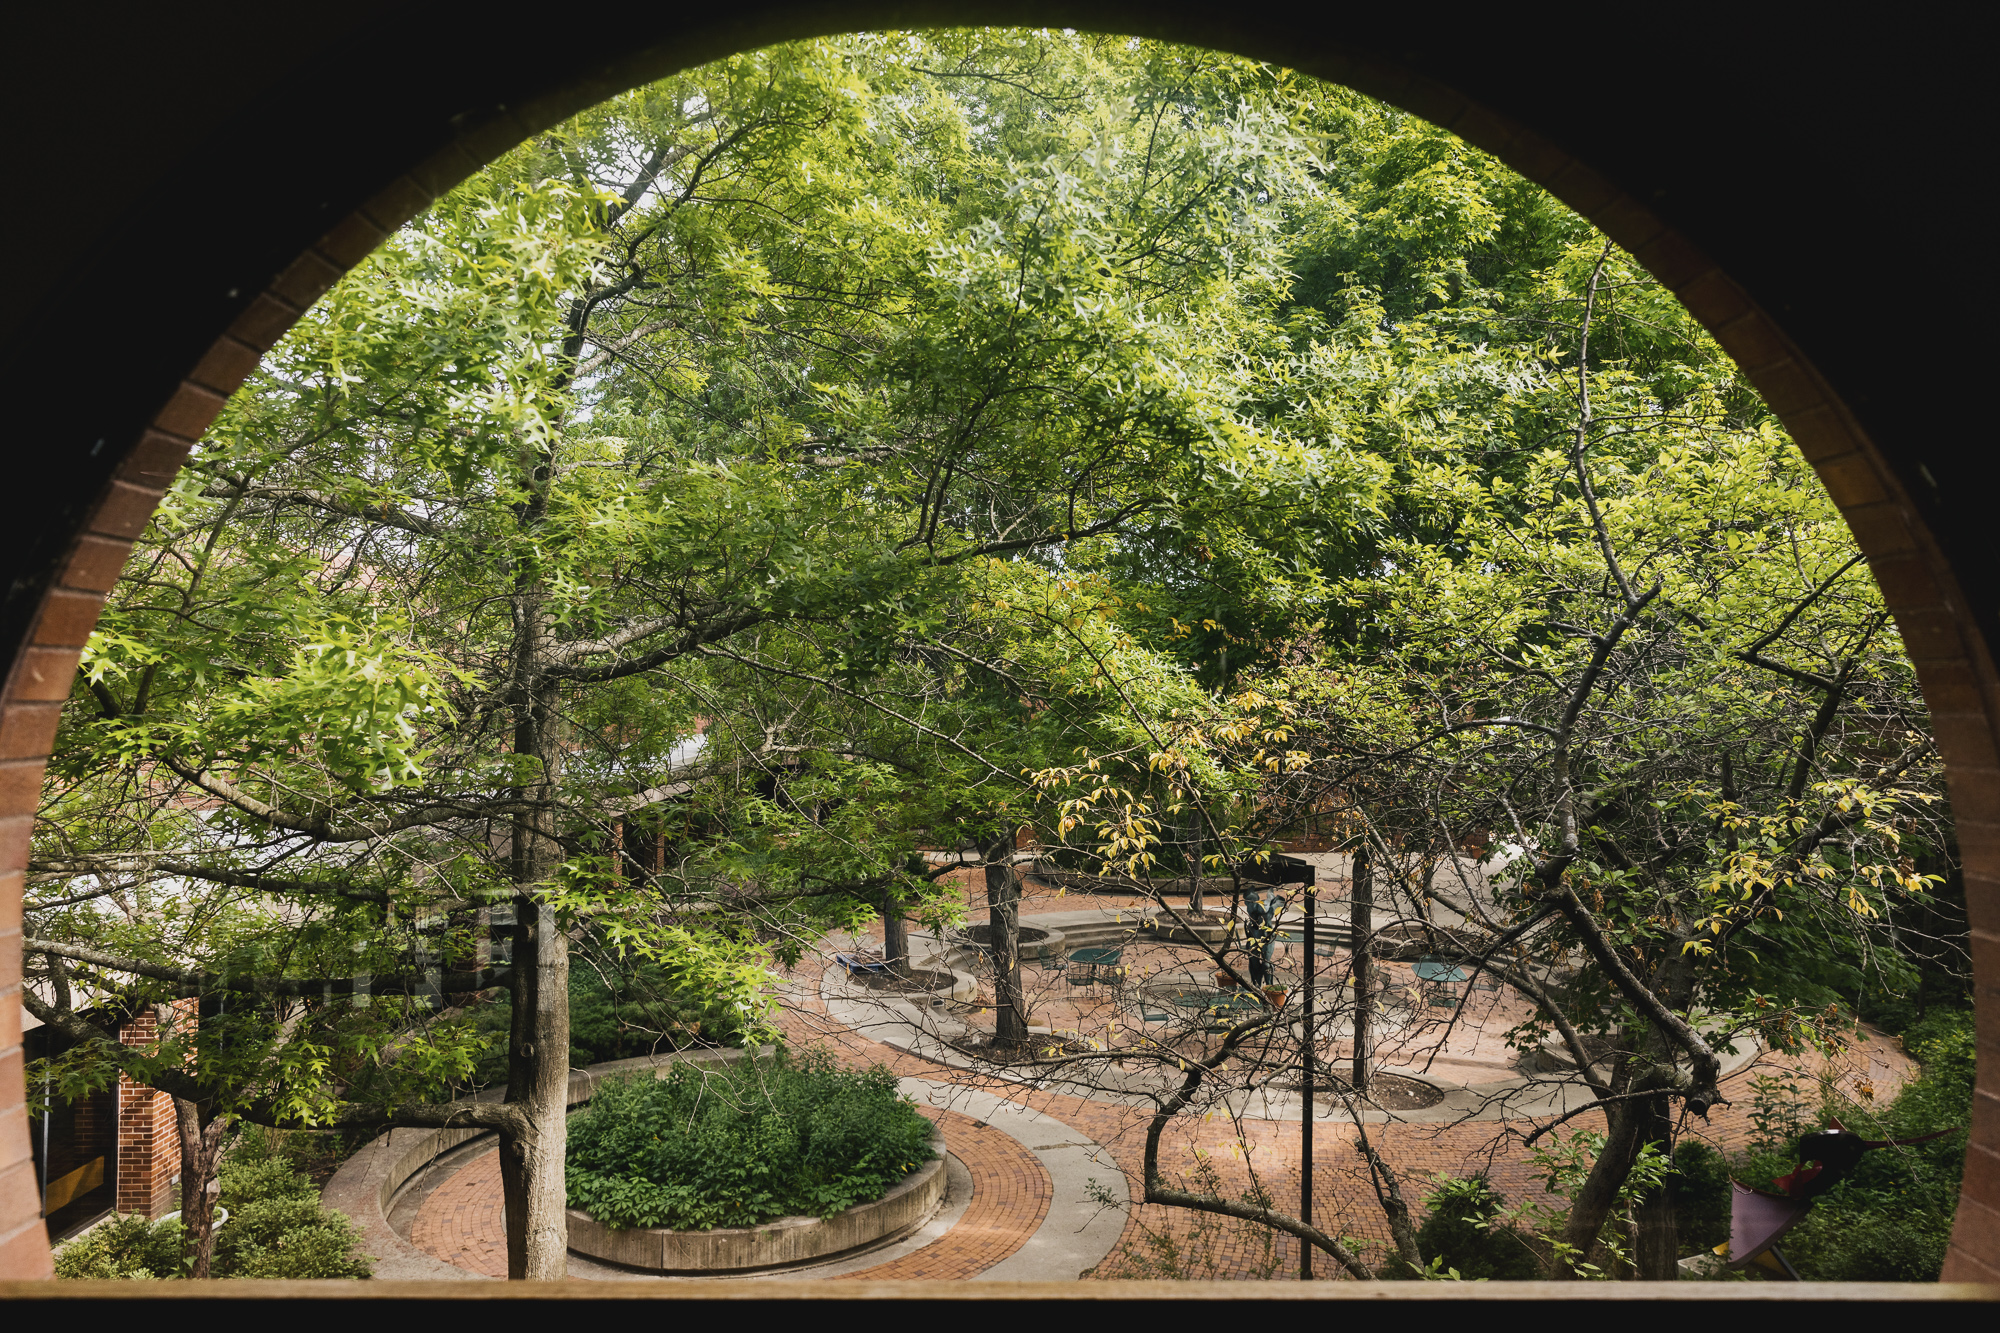 View of trees out of an arched window